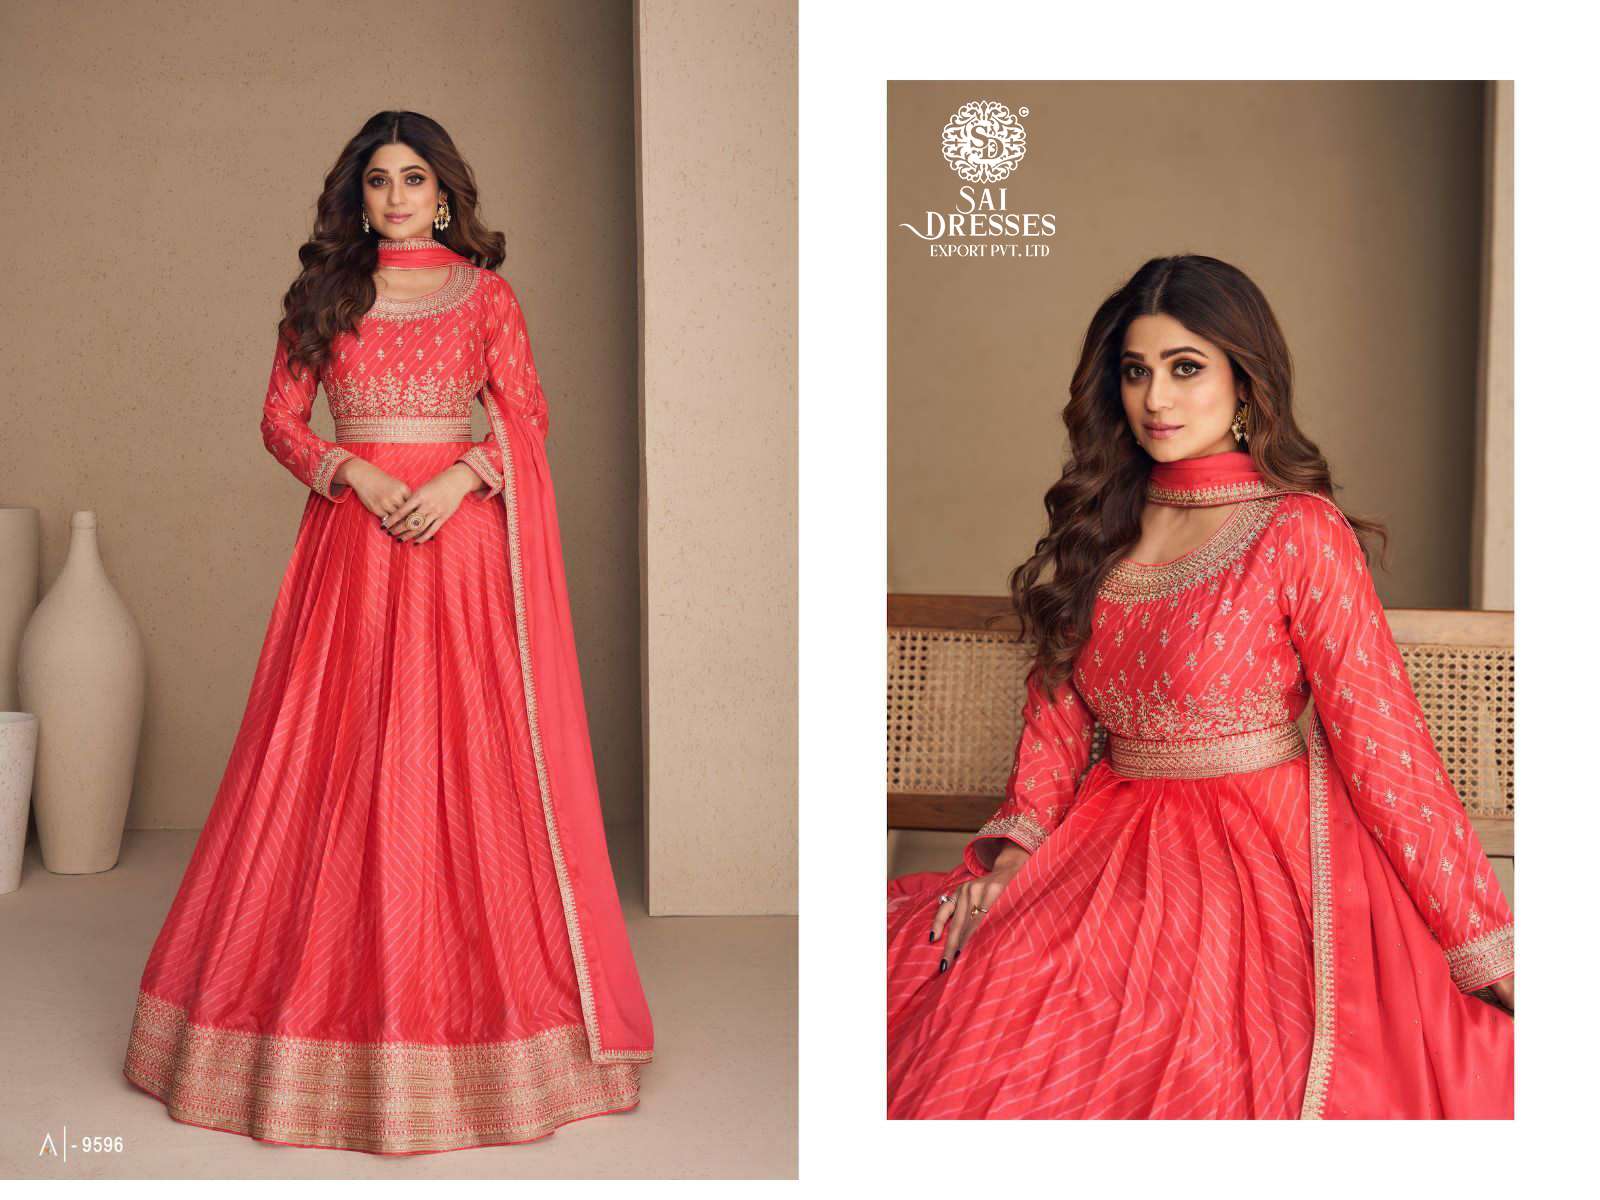 SAI DRESSES PRESENT RANI SAHIBA READYMADE WEDDING WEAR LONG GOWN STYLE DESIGNER SUITS IN WHOLESALE RATE IN SURAT 